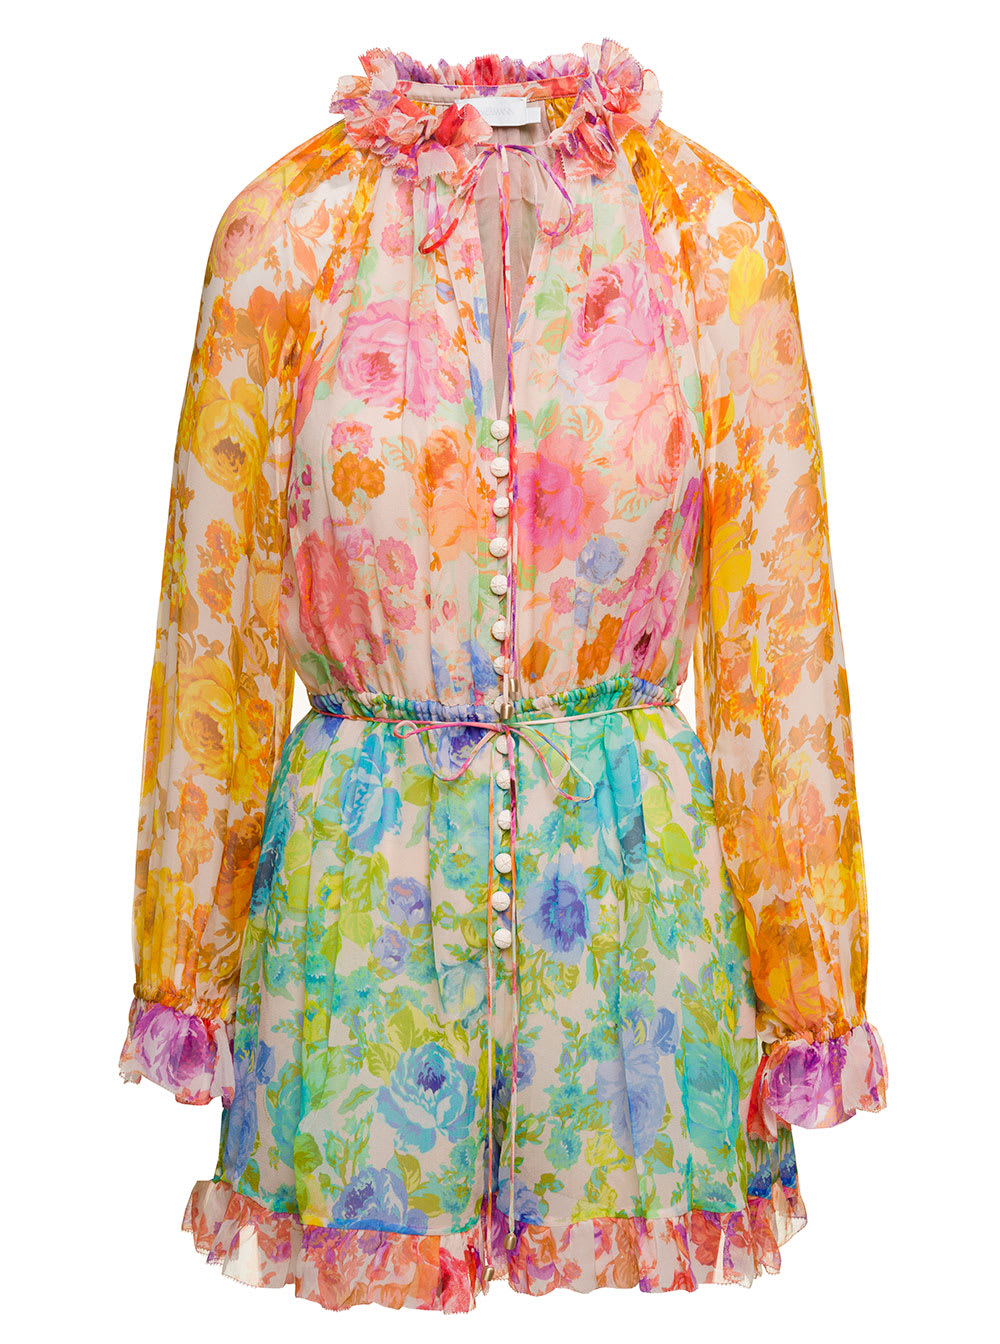 ZIMMERMANN RAIE MULTICOLOR LONG SLEEVED PLAYSUIT WITH ALL-OVER FLOREAL PRINT IN SILK WOMAN